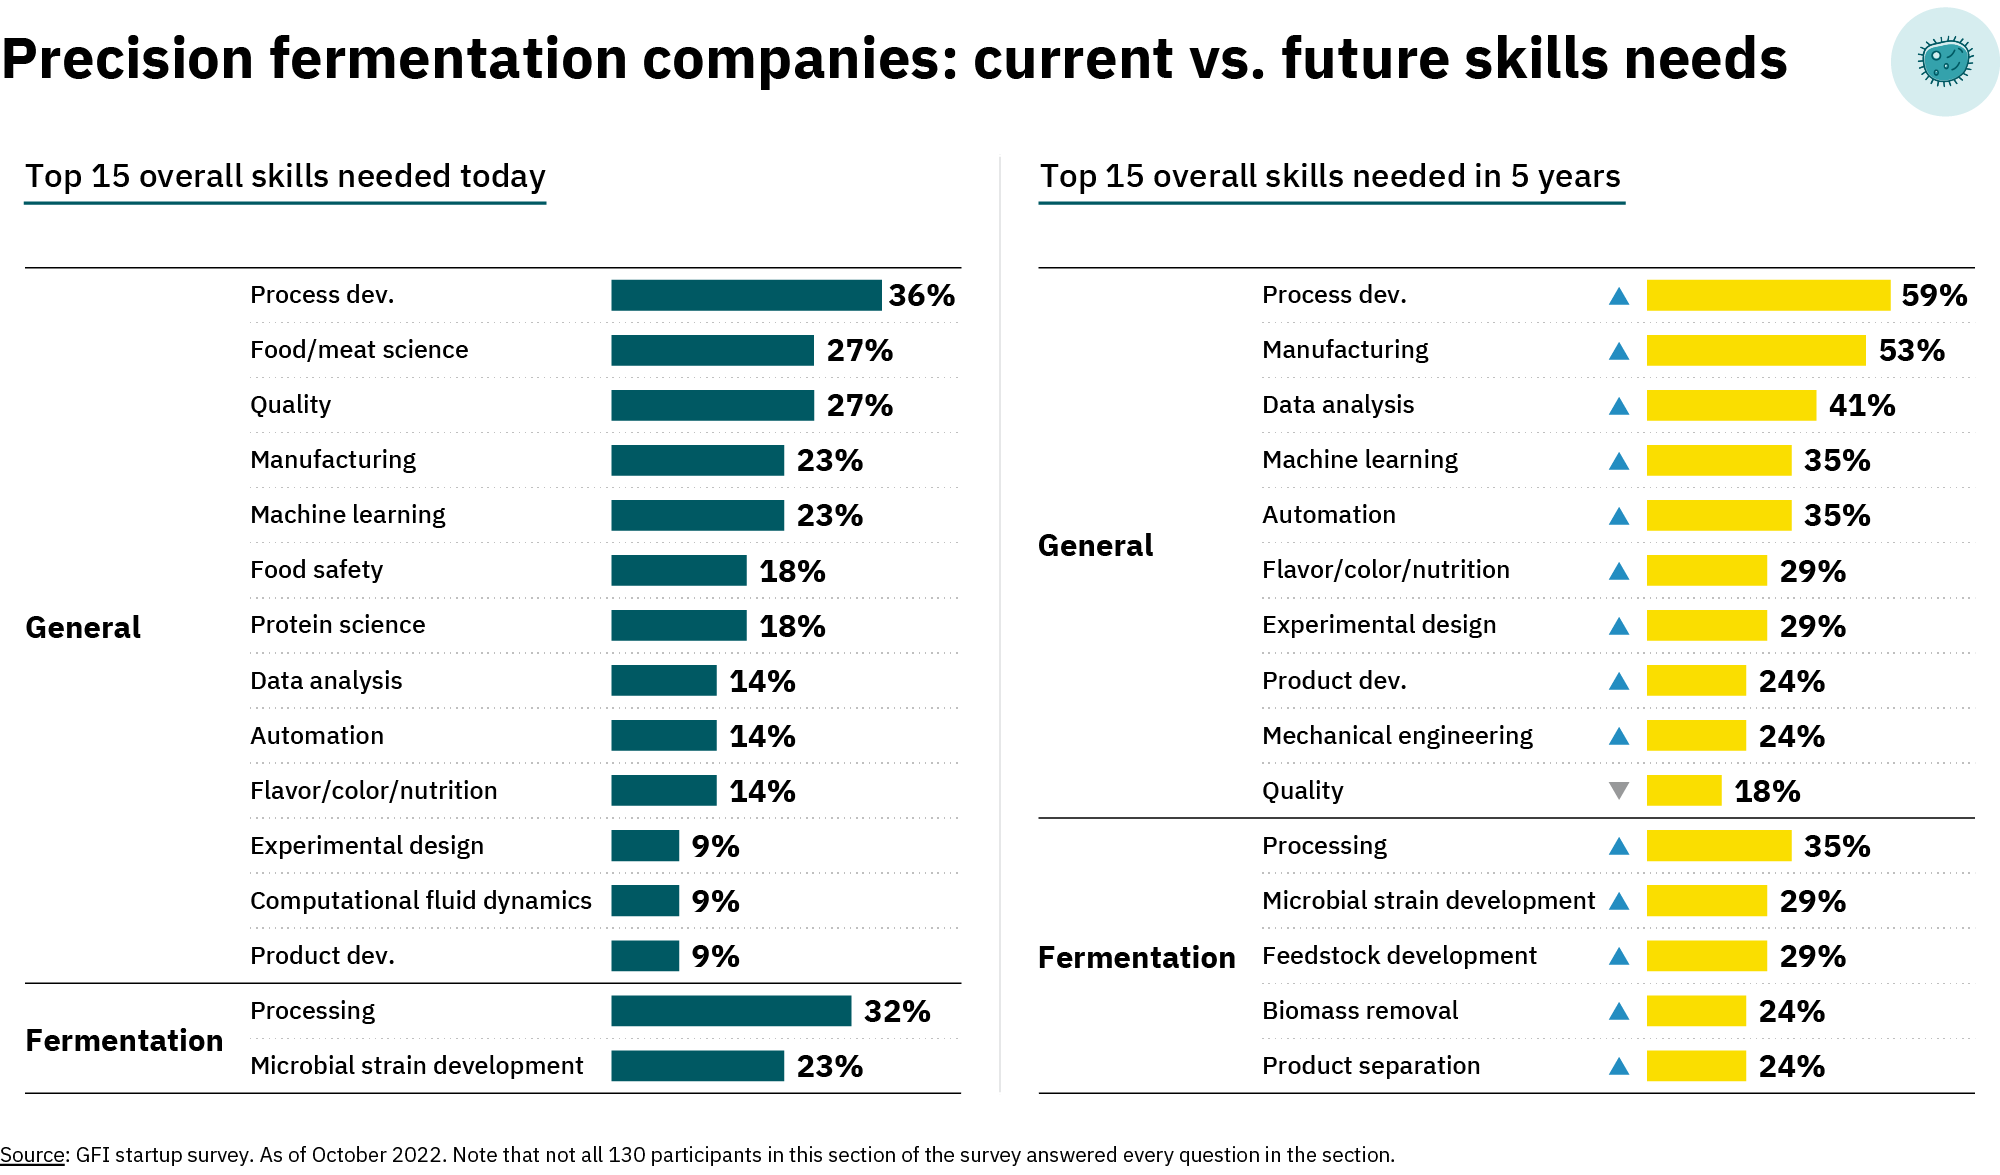 Precision fermentation companies: current vs. Future skills needs; top 15 overall skills needed today - general: process dev. 36%, food/meat science 27%, quality 27%, manufacturing 23%, machine learning 23%, food safety 18%, protein science 18%, data analysis 14%, automation 14%, flavor/color/nutrition 14%, experimental design 9%, computational fluid dynamics 9%, product dev. 9%; fermentation: processing 32%, microbial strain development 23%; top 15 overall skills needed in 5 years - general: process dev 59%, manufacturing 53%, data analysis 41%, machine learning 35%, automation 35%, flavor/color/nutrition 29%, experimental design 29%, product dev 24%, mechanical engineering 24%, quality 18%; fermentation: processing 35%, microbial strain development 29%, feedstock development 29%, biomass removal 24%, product separation 24%